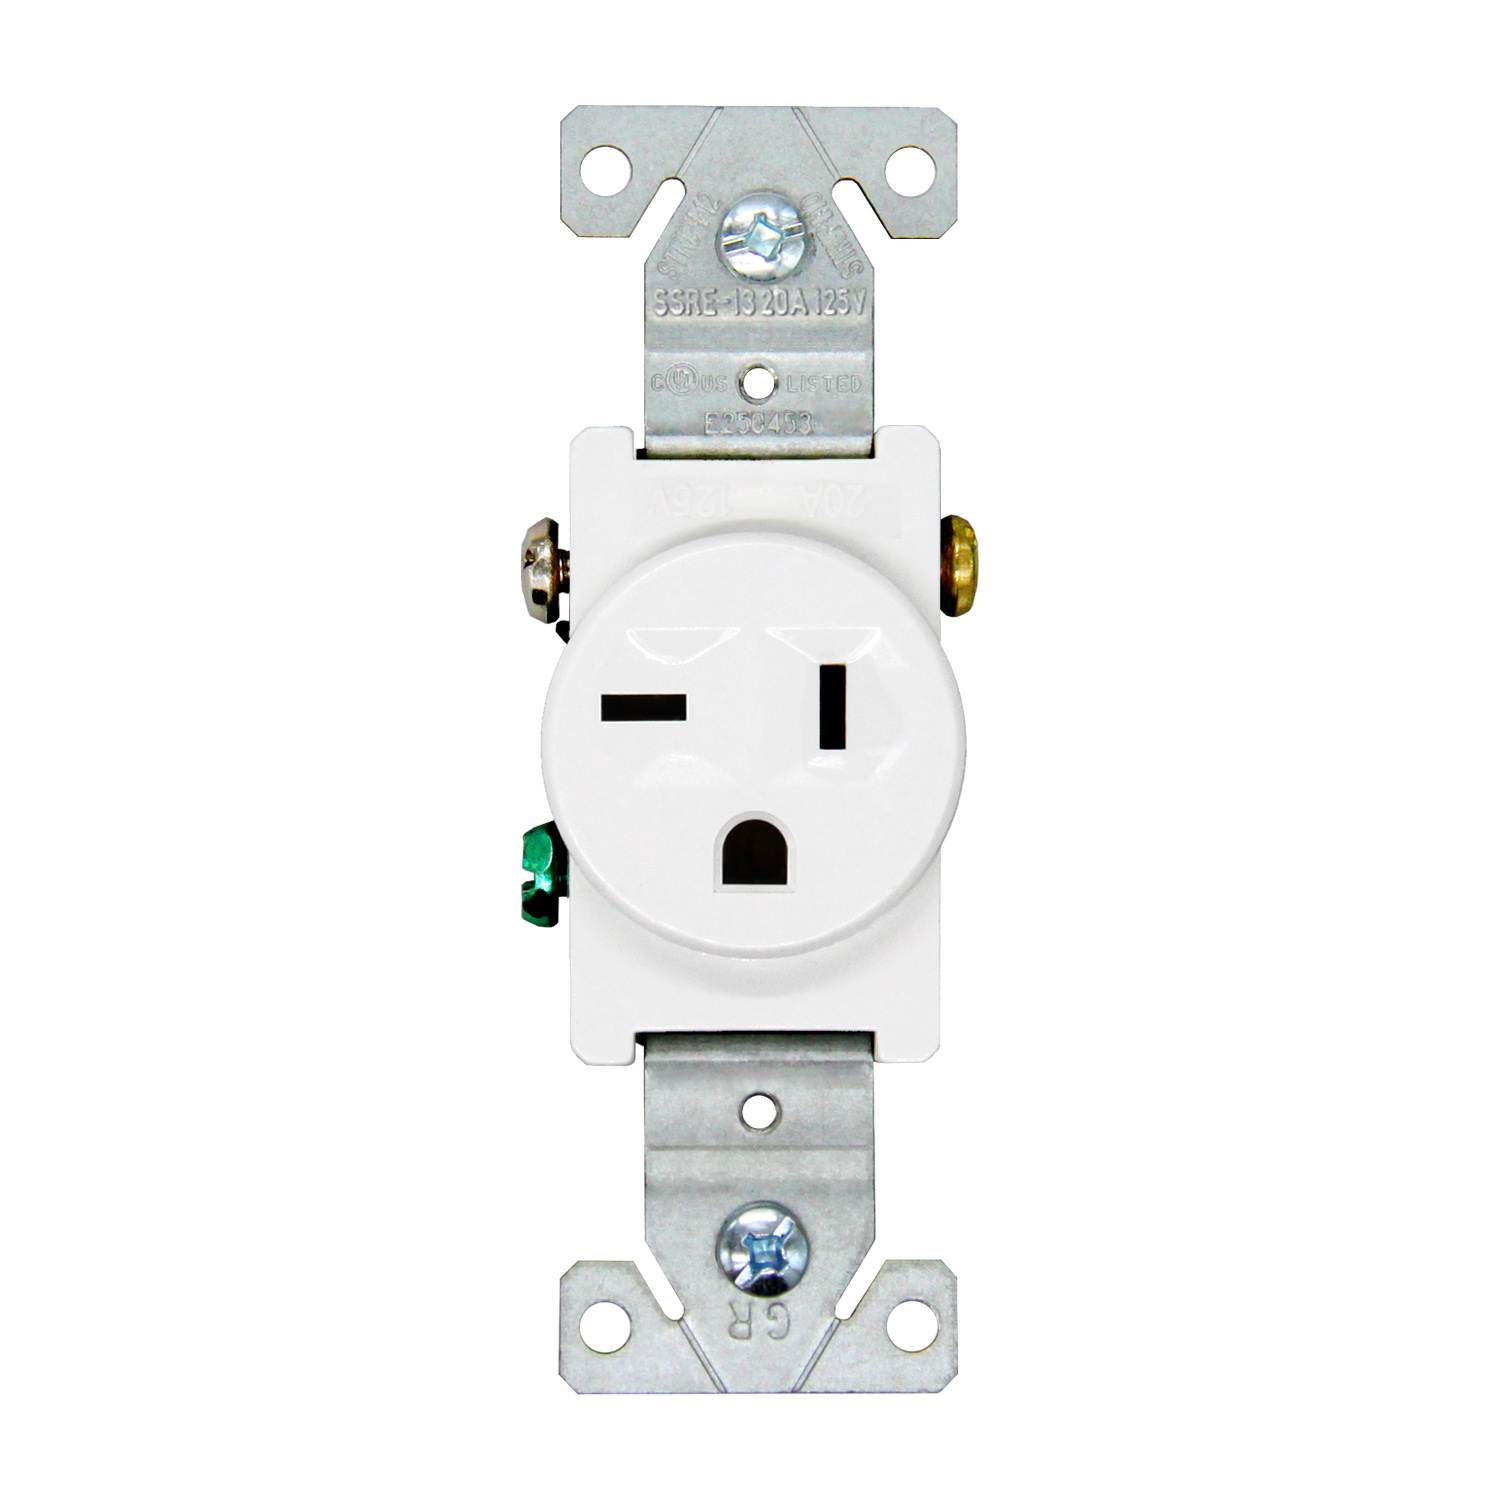 UL Listed Grounding Screw 20 Amp single Receptacle, 3-Wire, 2-Pole, 5-20R, SSRE-13